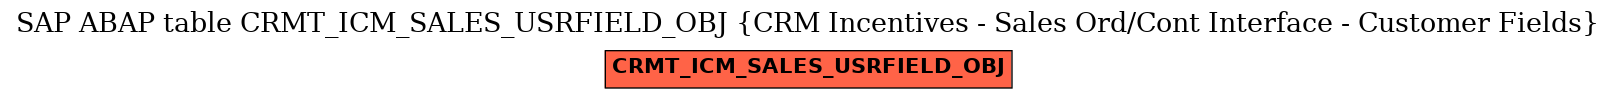 E-R Diagram for table CRMT_ICM_SALES_USRFIELD_OBJ (CRM Incentives - Sales Ord/Cont Interface - Customer Fields)